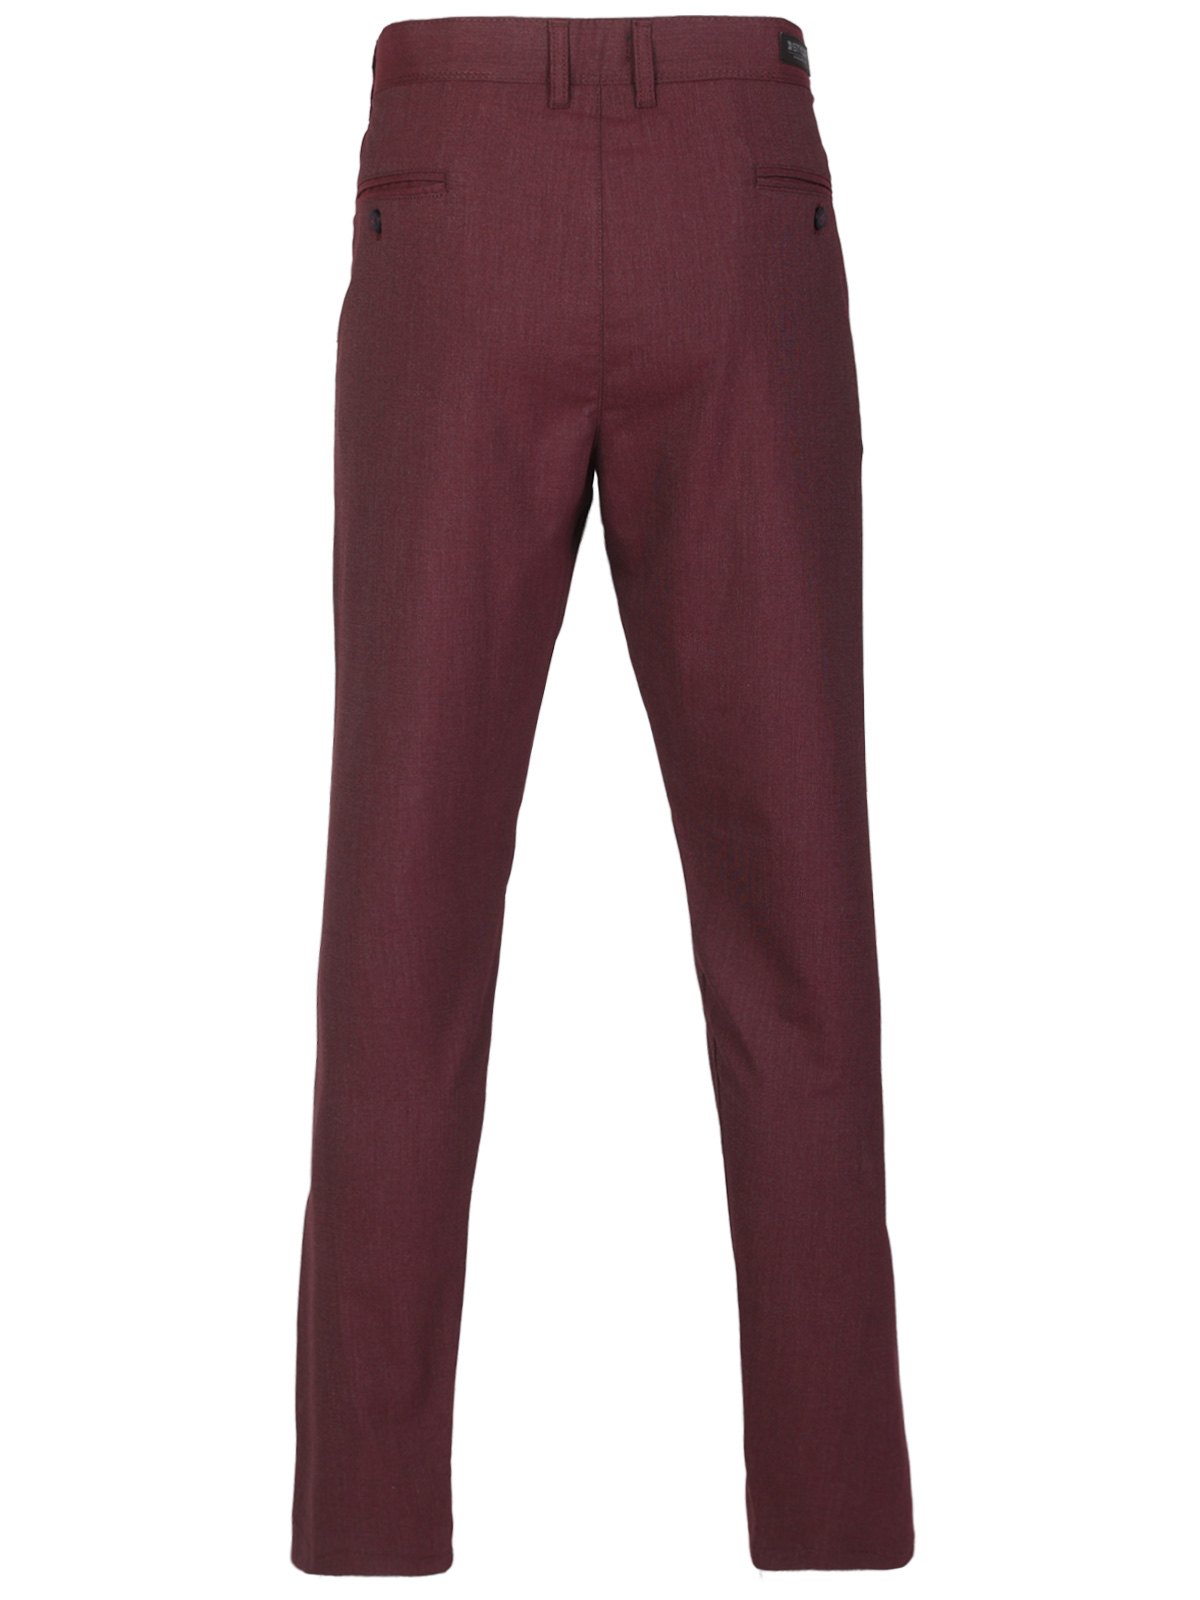 Fitted burgundy melange trousers - 60312 € 66.37 img2